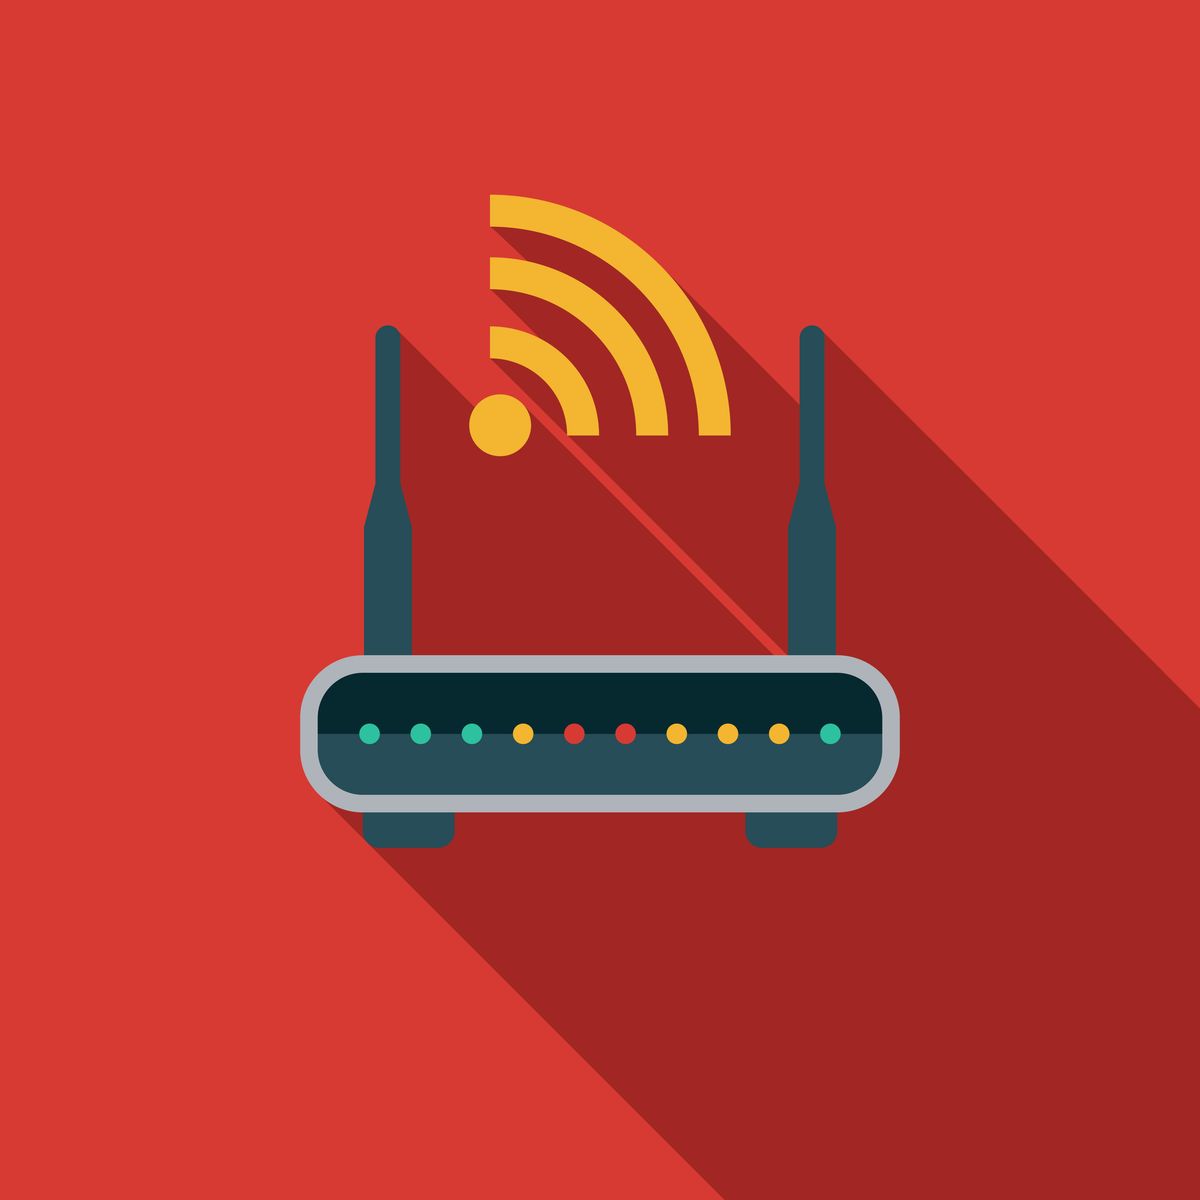 How to Test Your Wi-Fi Speed